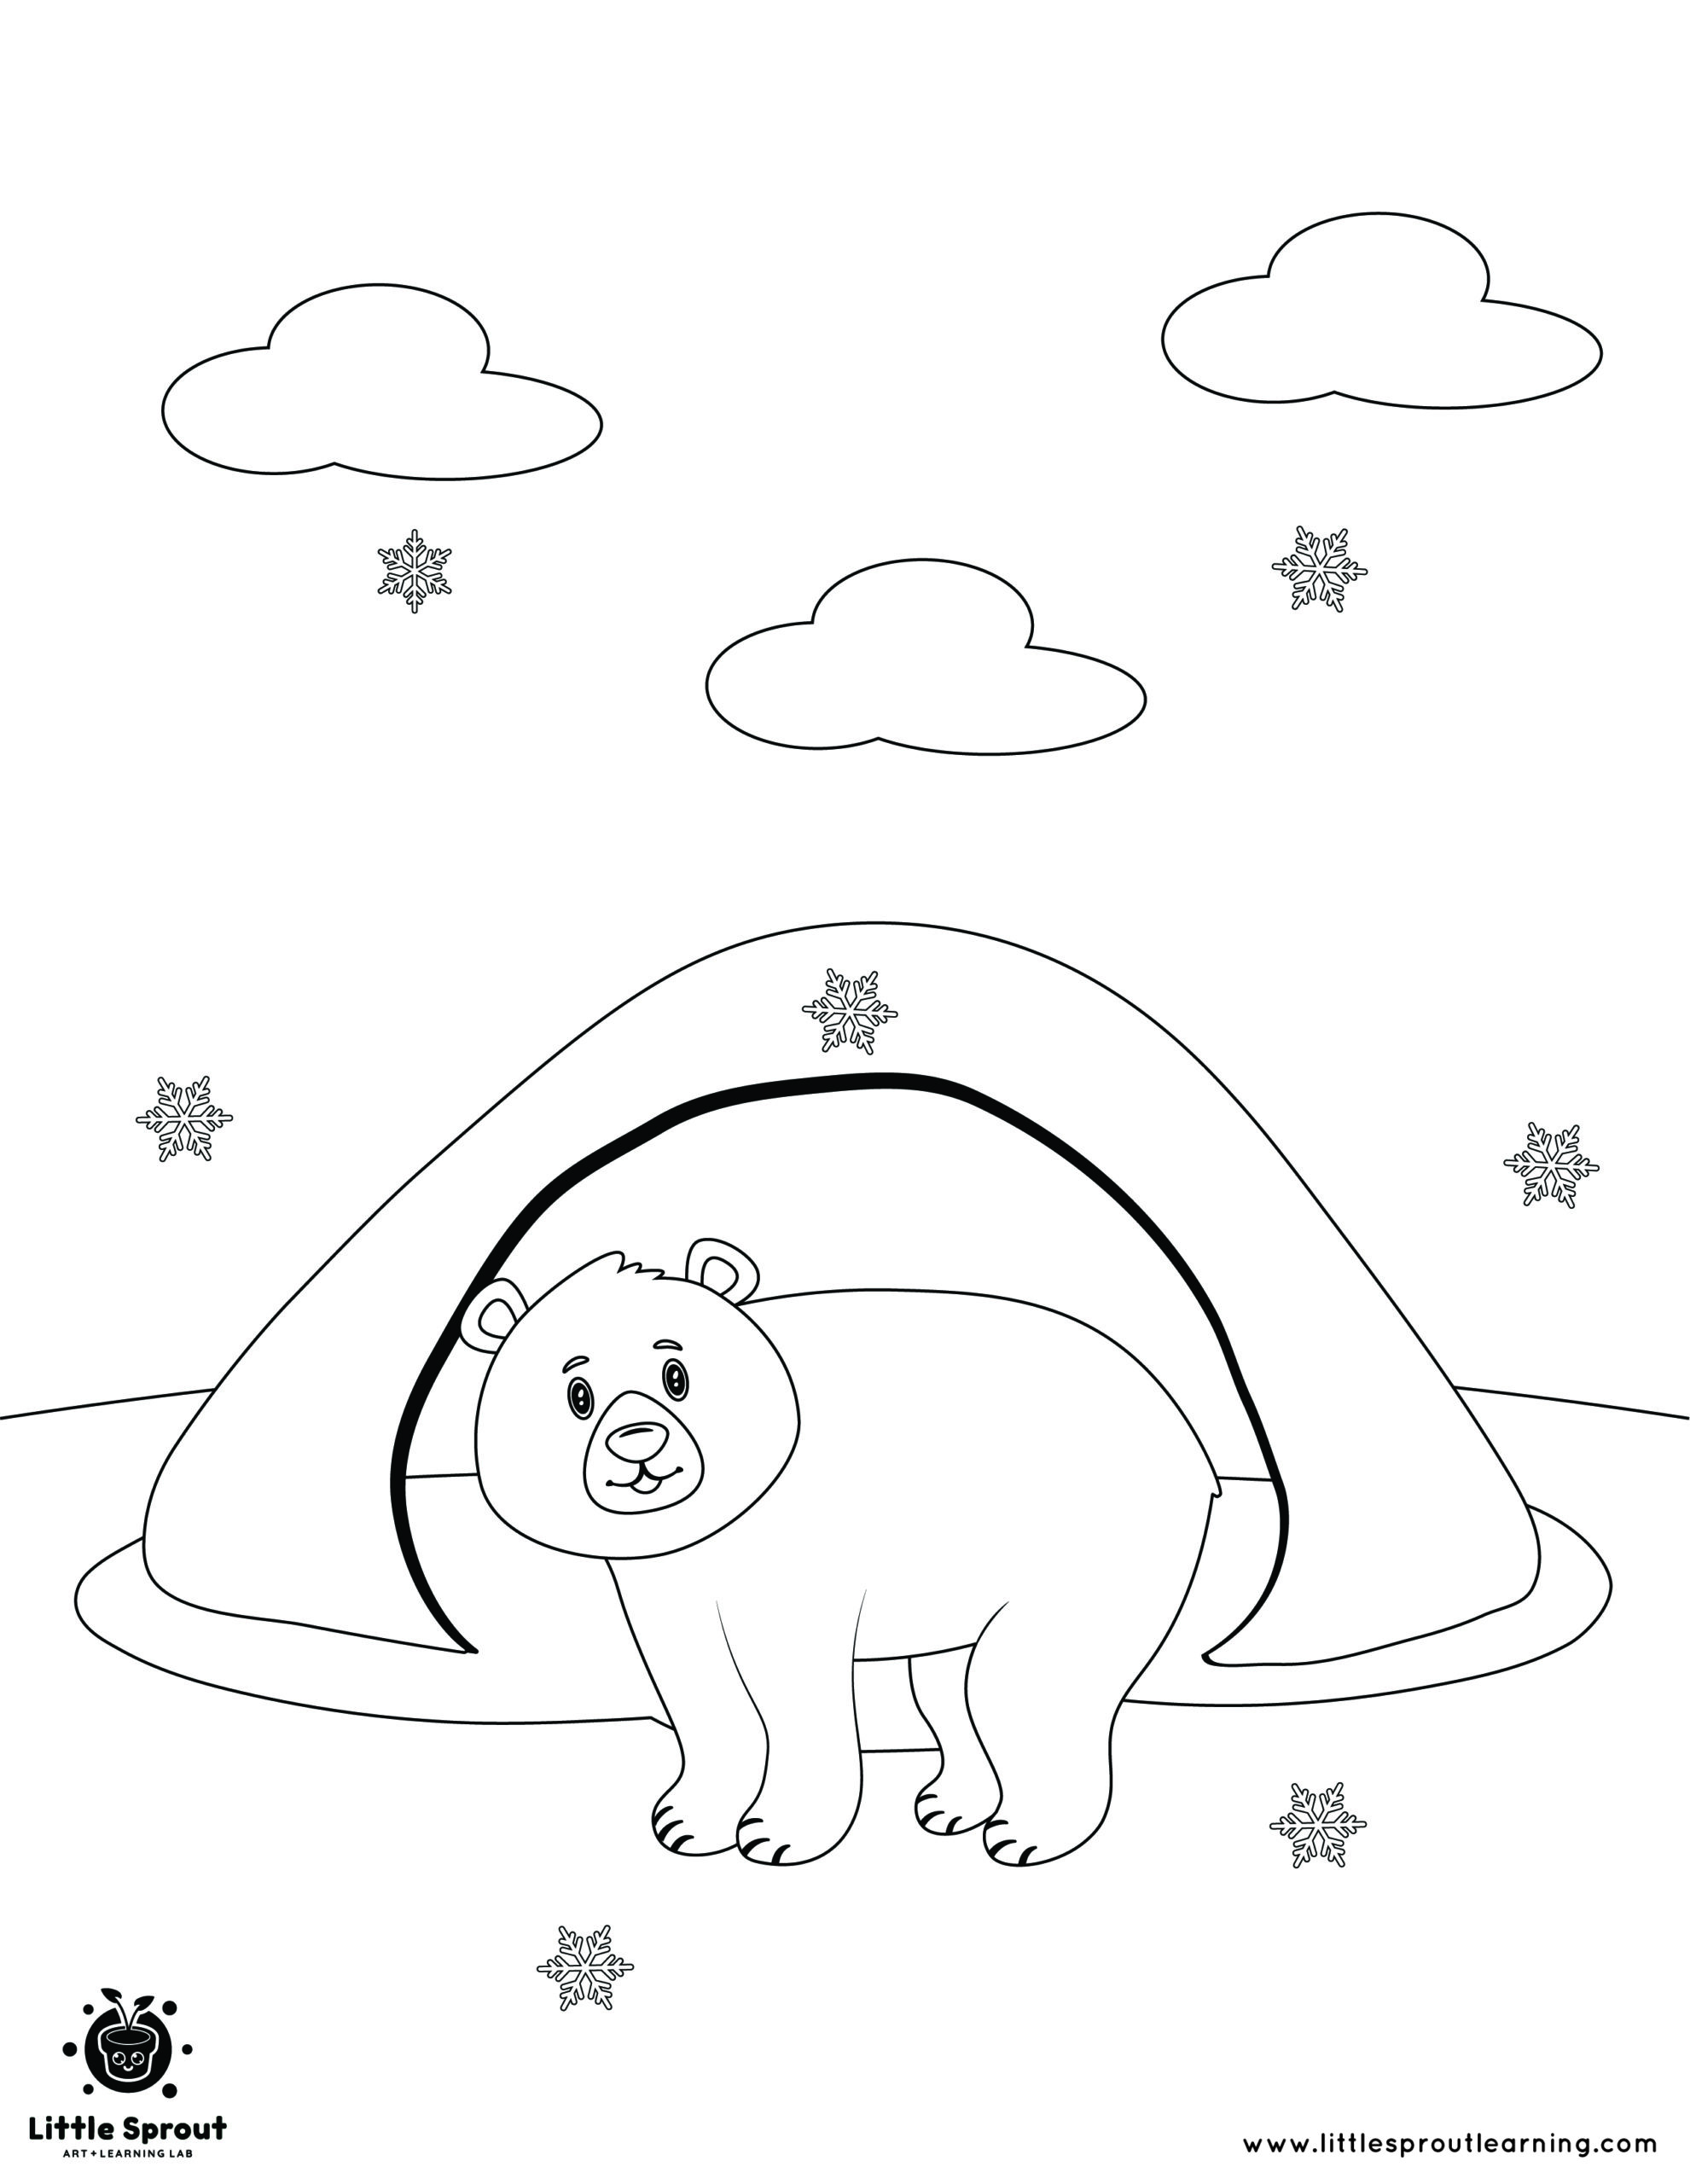 Testing the Outdoors – Hibernating Animals Coloring Page